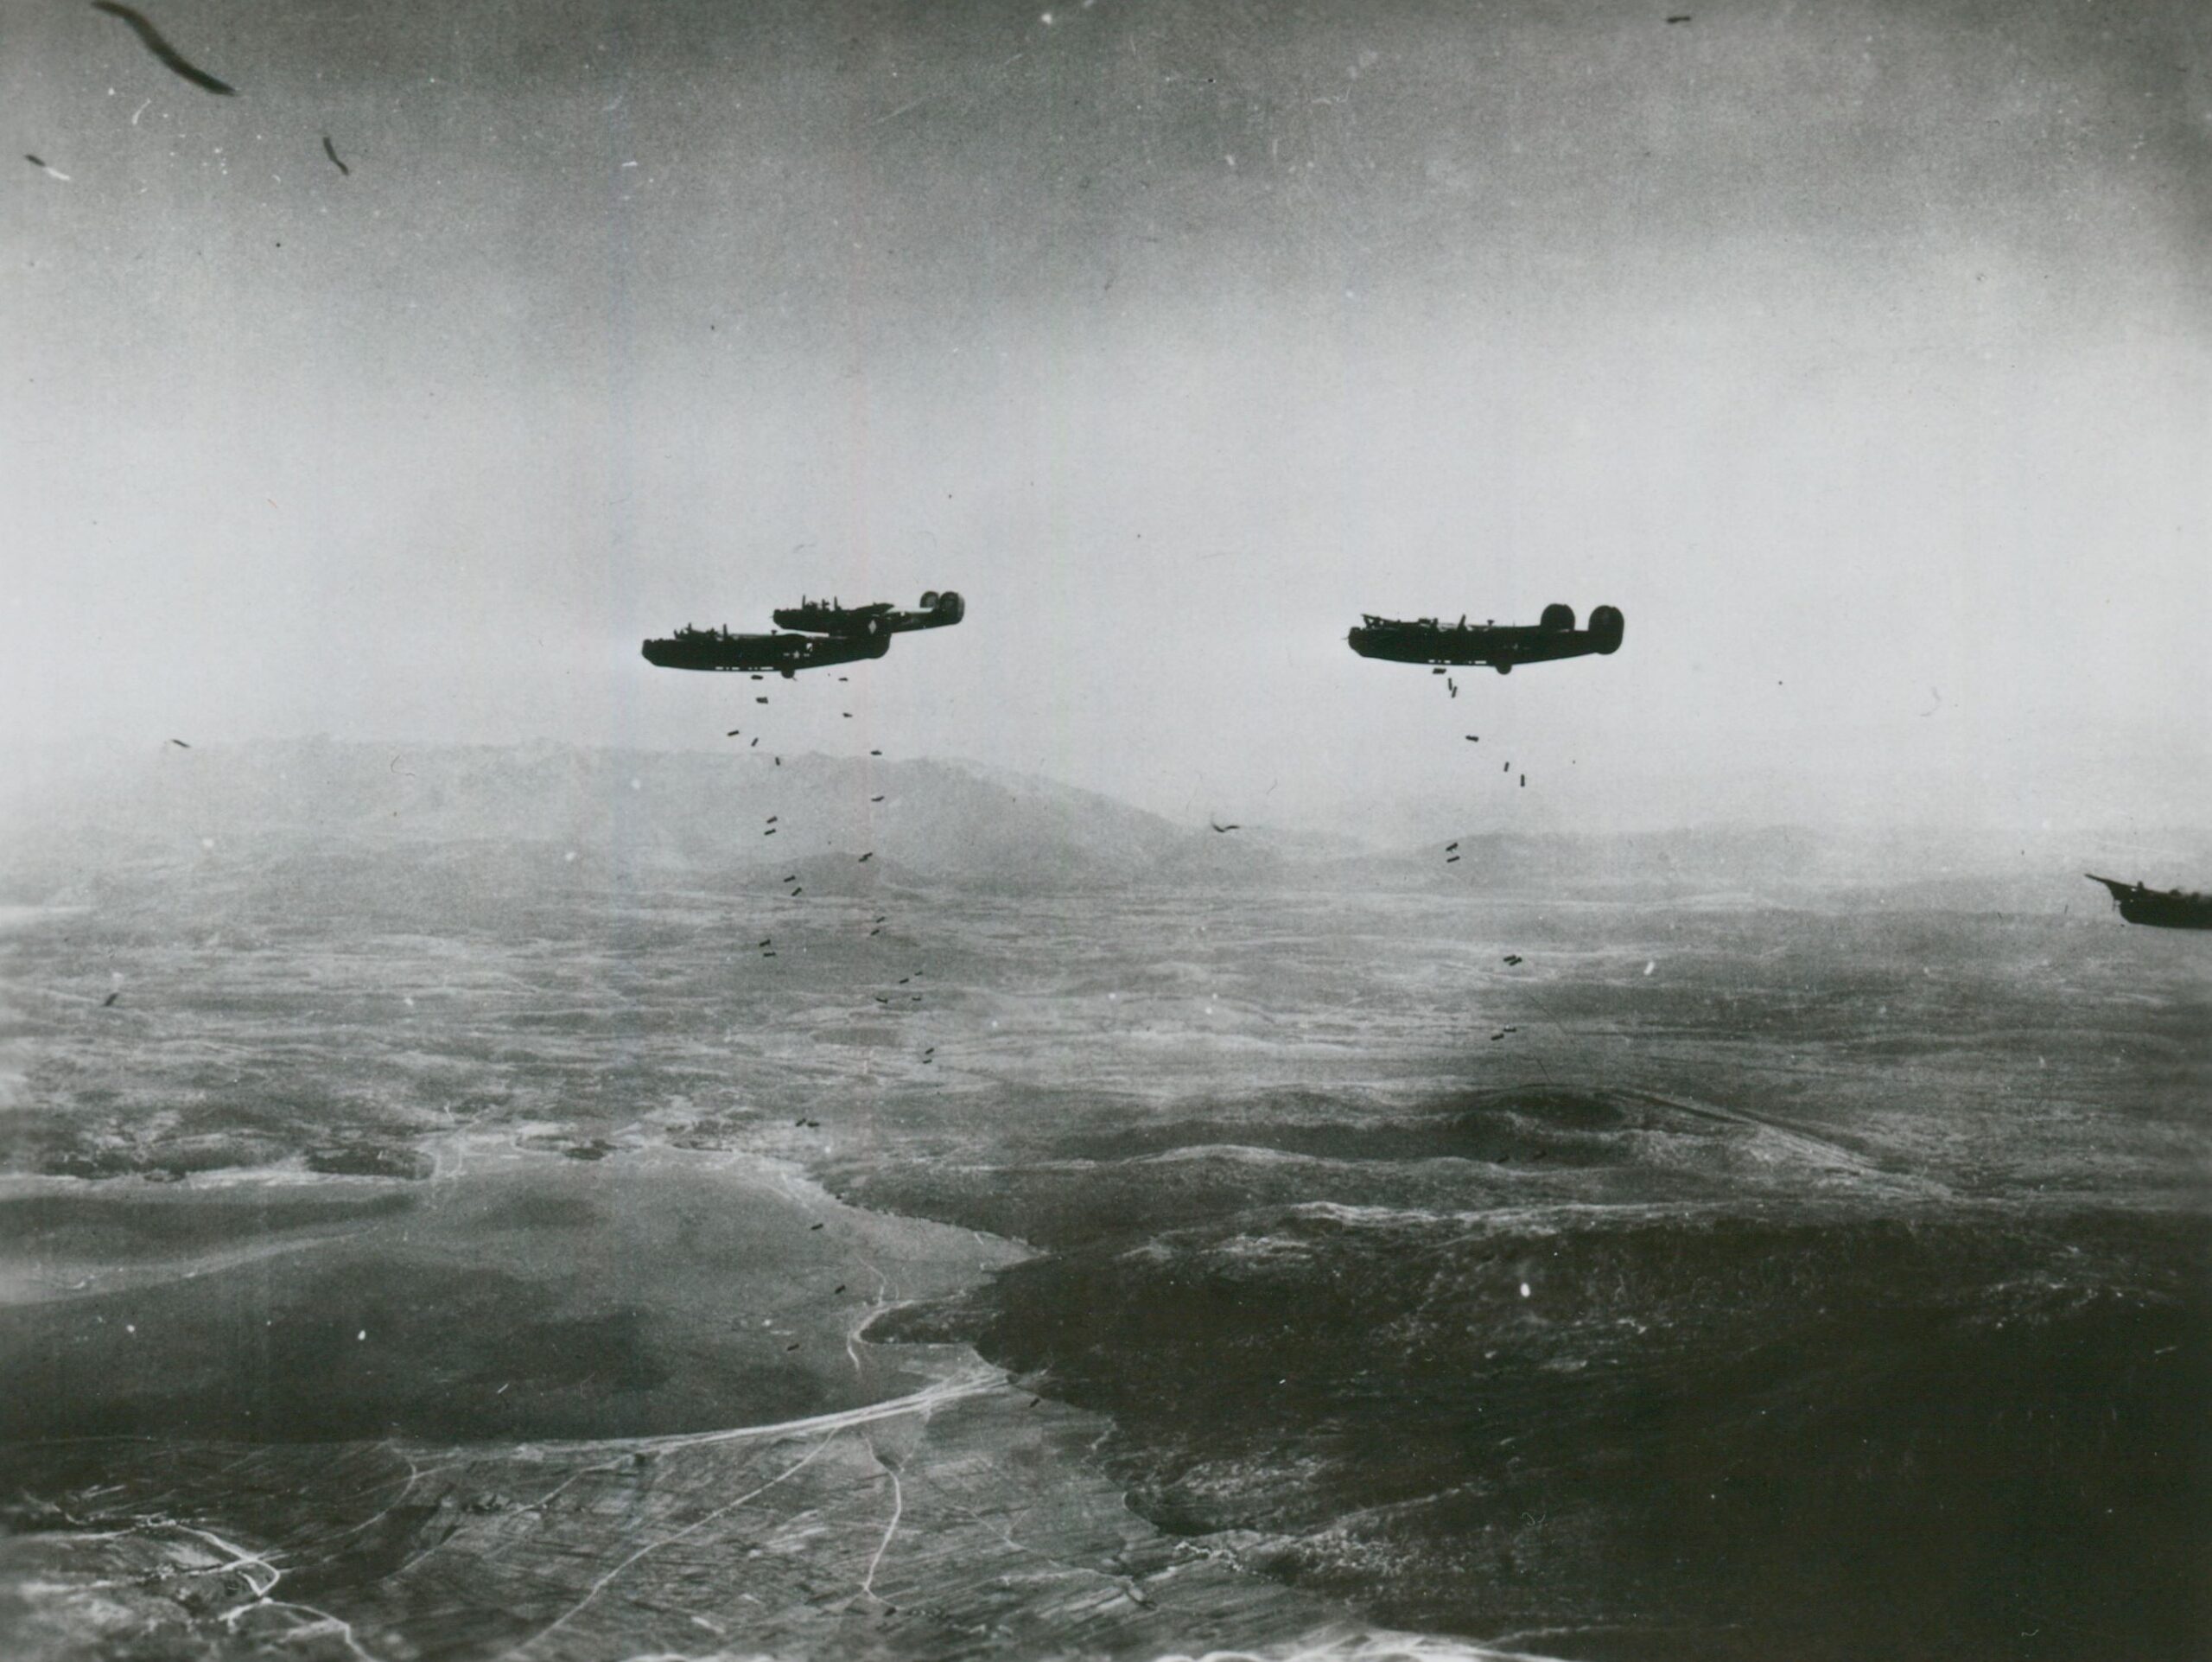 Bomber planes dropping bomb during WWII